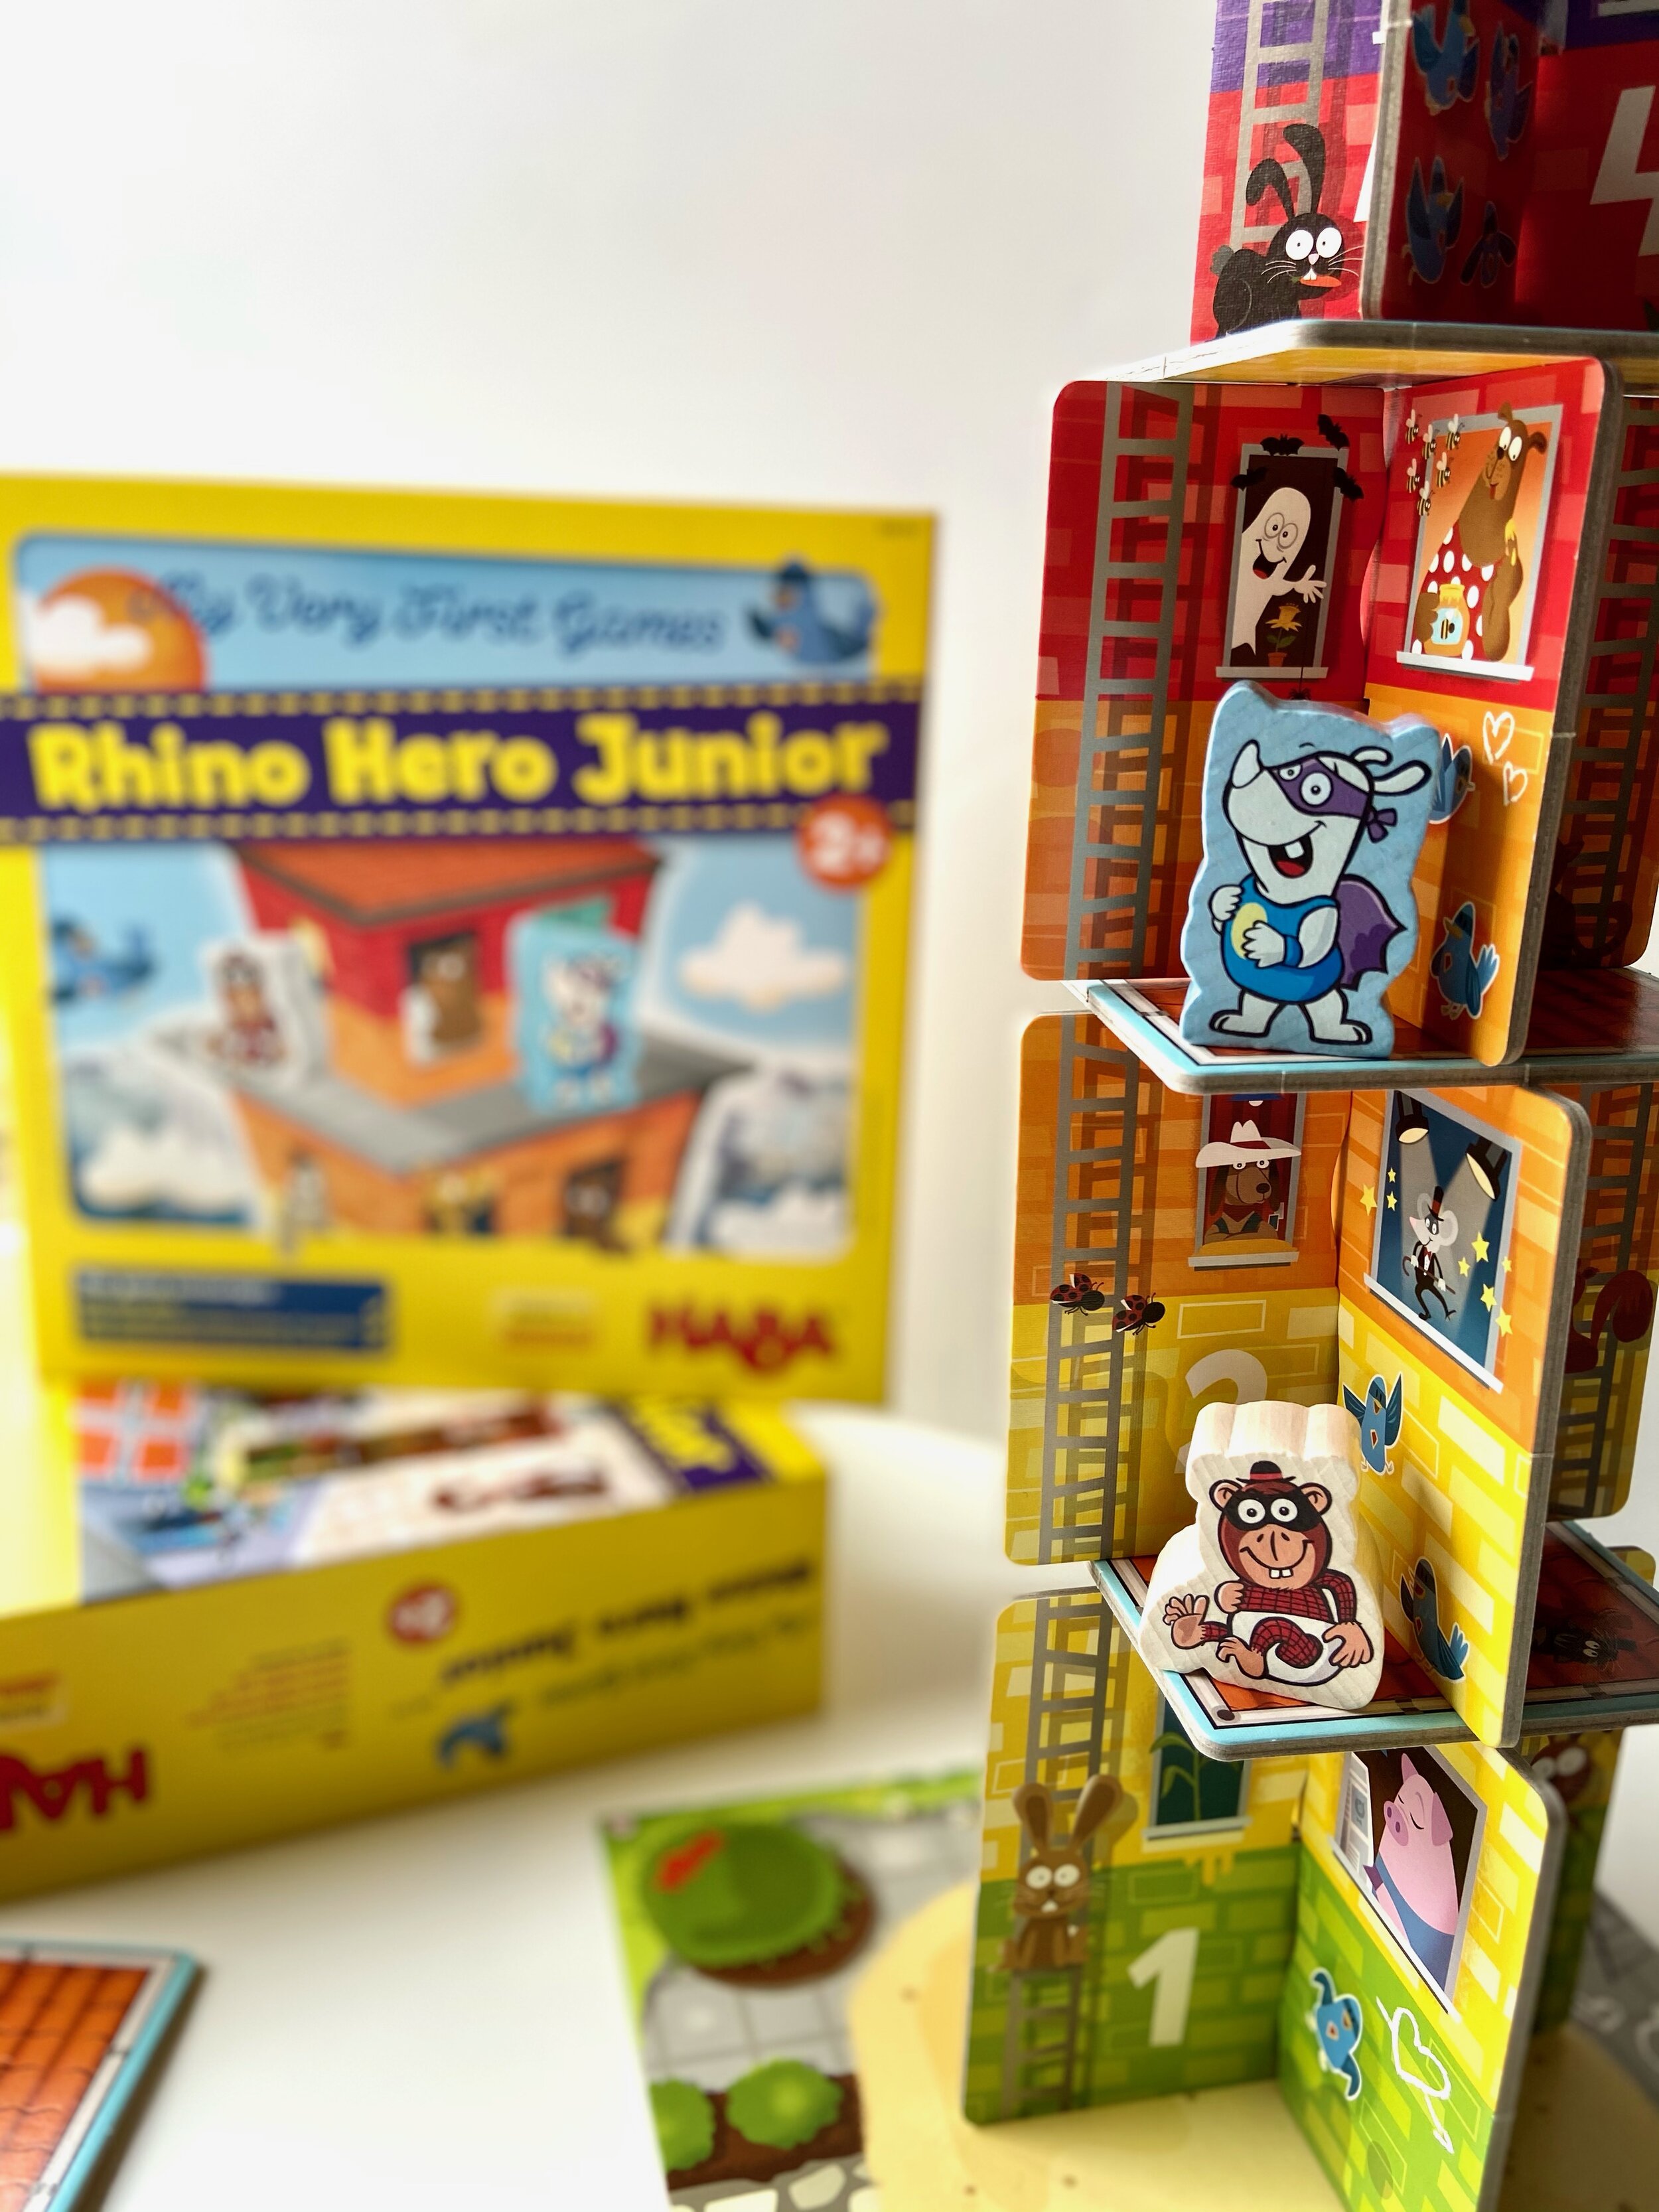 Rhino Hero Junior: A Dexterity Game for the Littlest Hands | Dad 